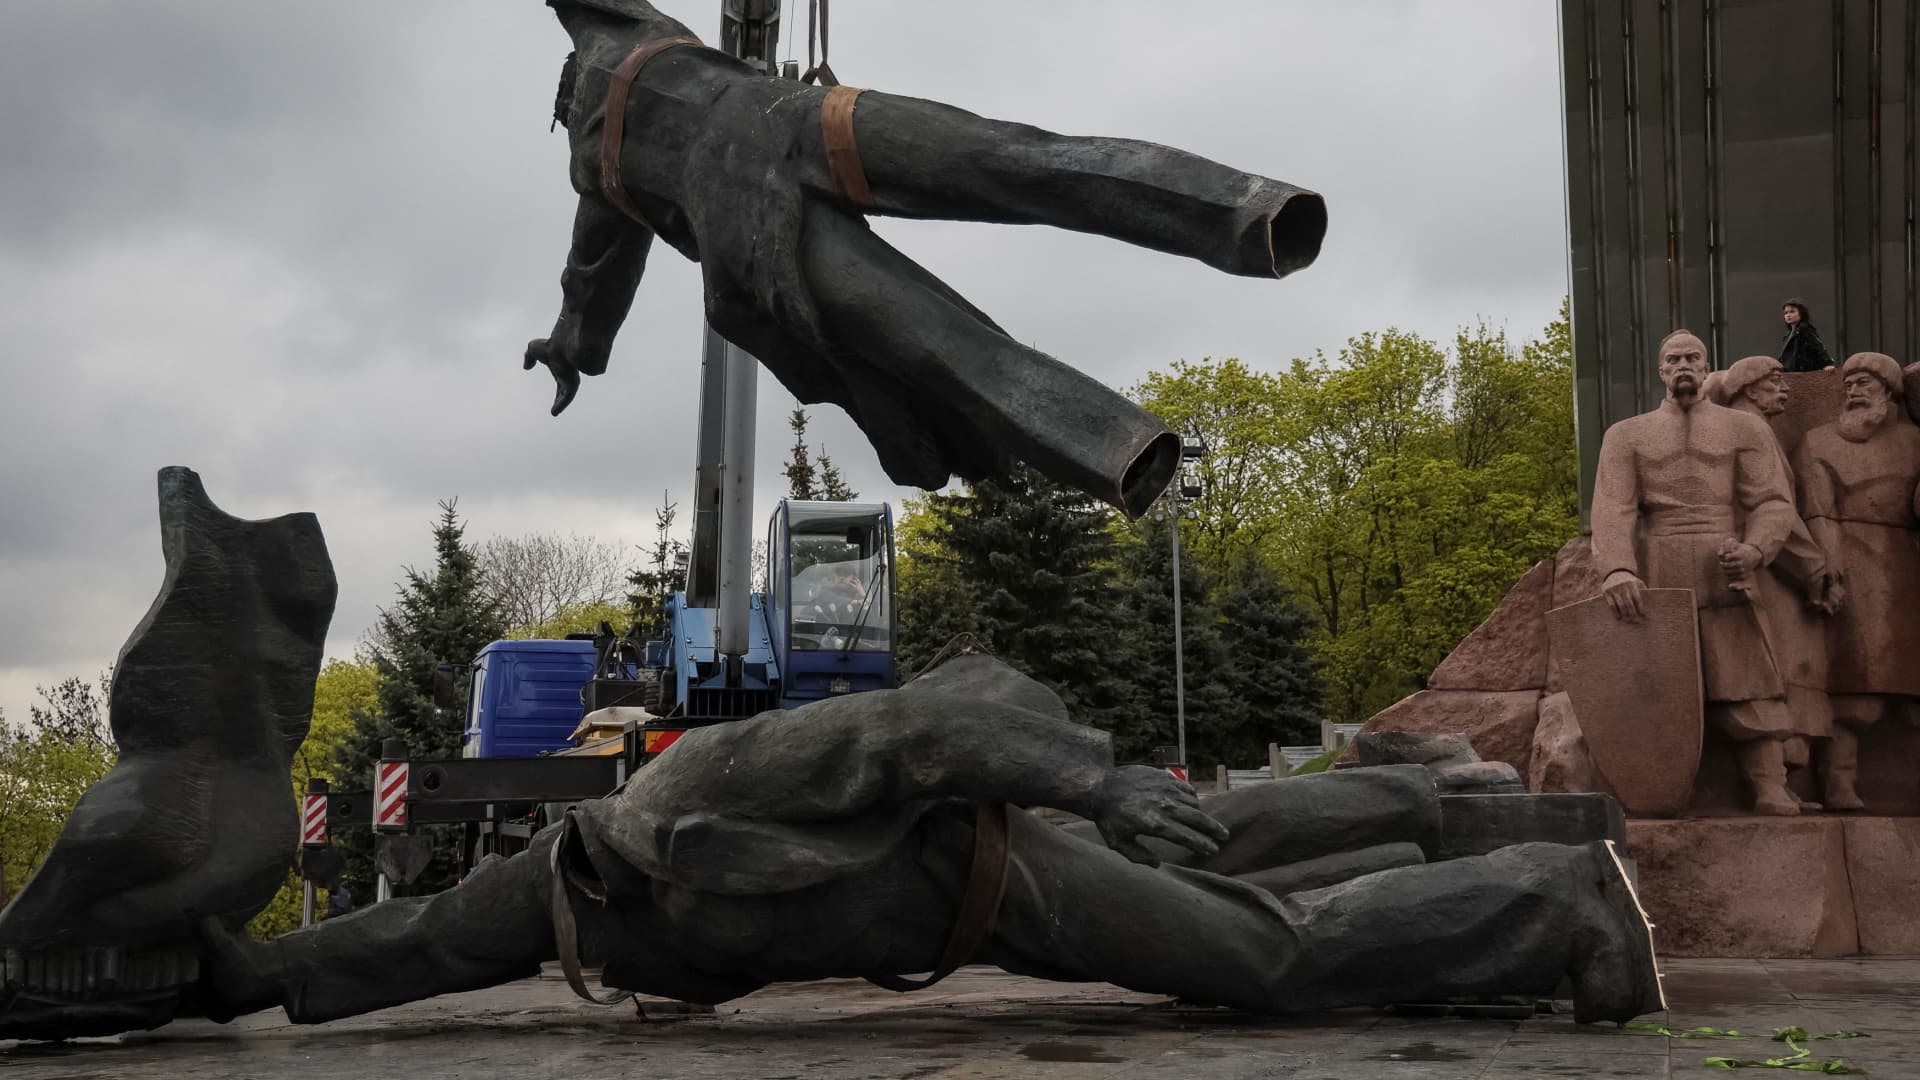 A Soviet monument to a friendship between Ukrainian and Russian nations is seen during its demolition, amid Russia's invasion of Ukraine, in central Kyiv, Ukraine April 26, 2022.